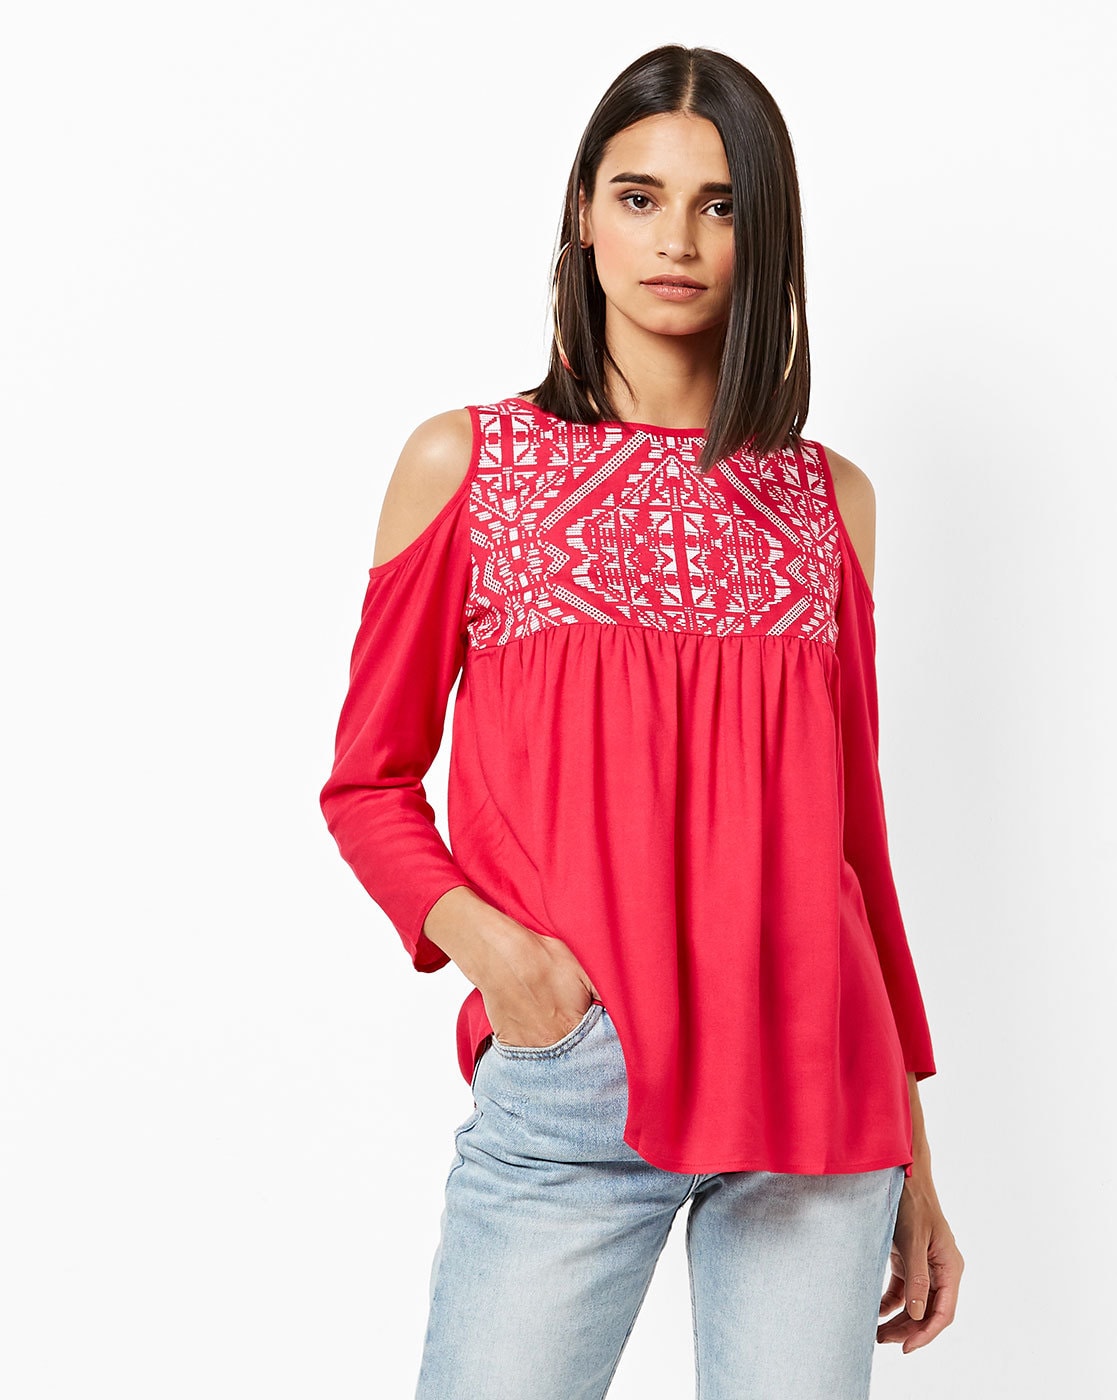 Found a cold shoulder top you like? we have a wide range of tops on offer